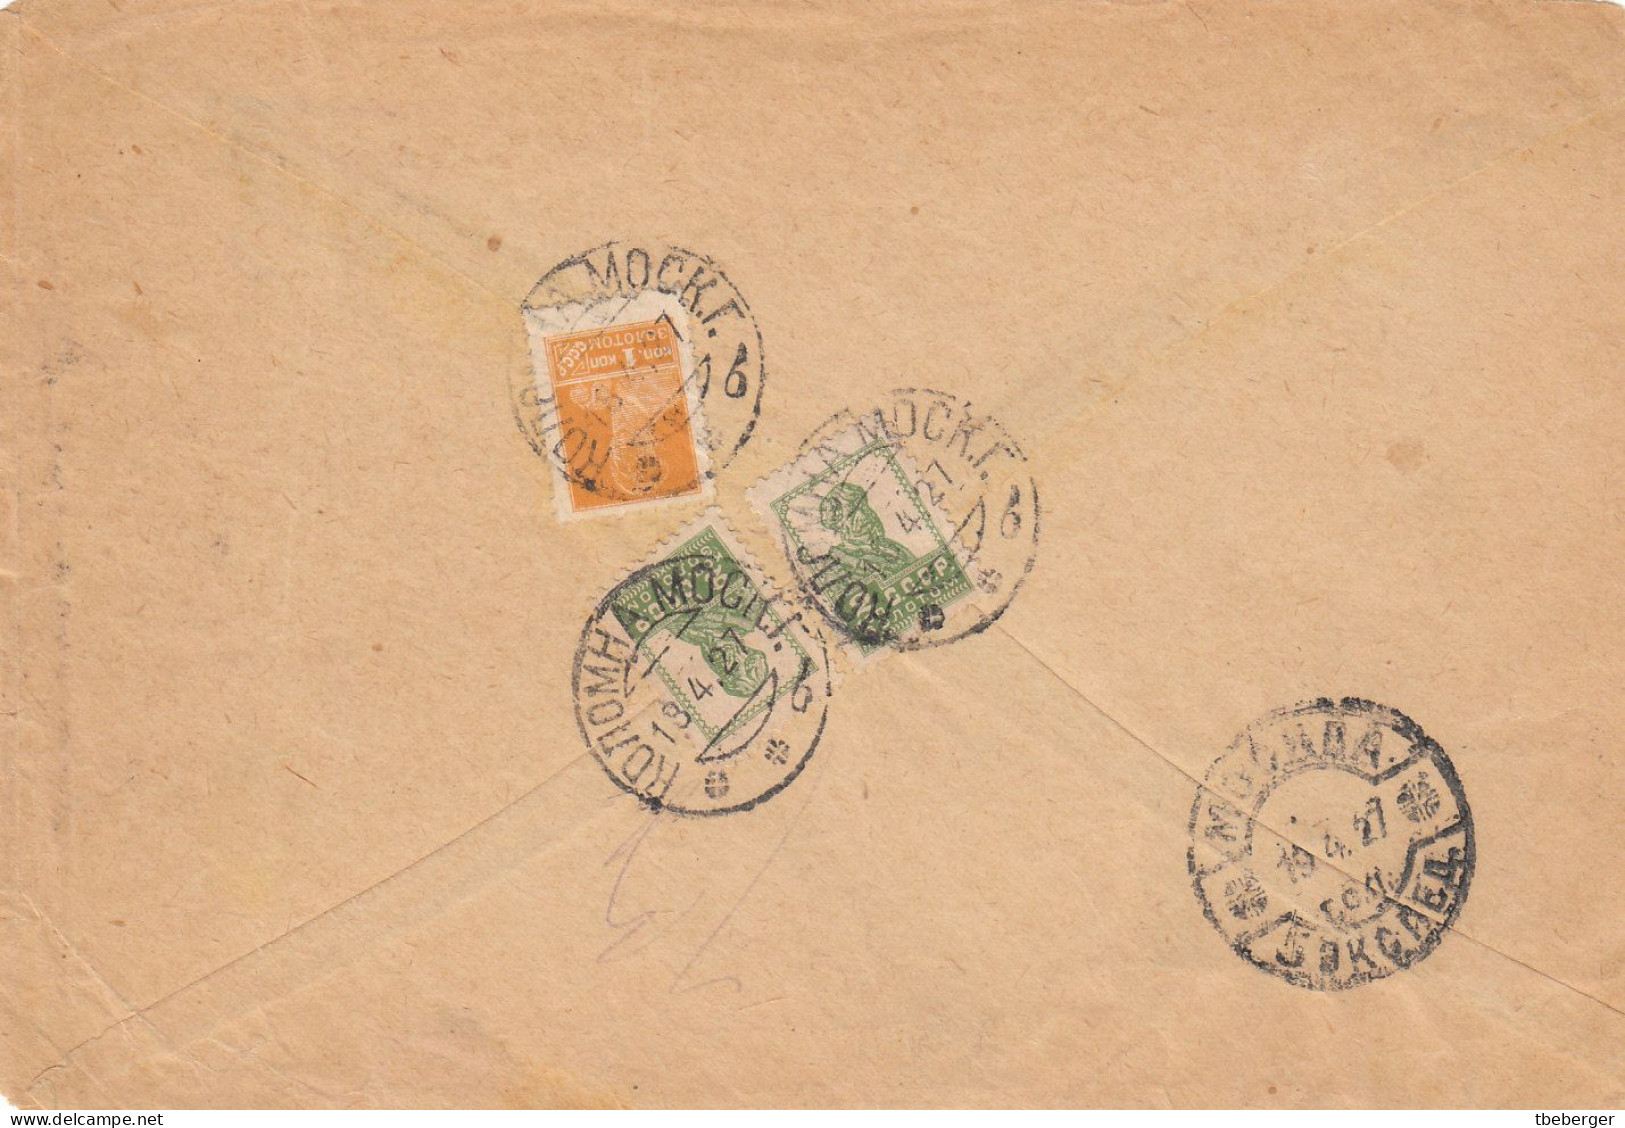 Russia USSR 1927 Special Post Express Mail KOLOMNA To MOSCOW Cover, Ex Miskin (35) - Covers & Documents